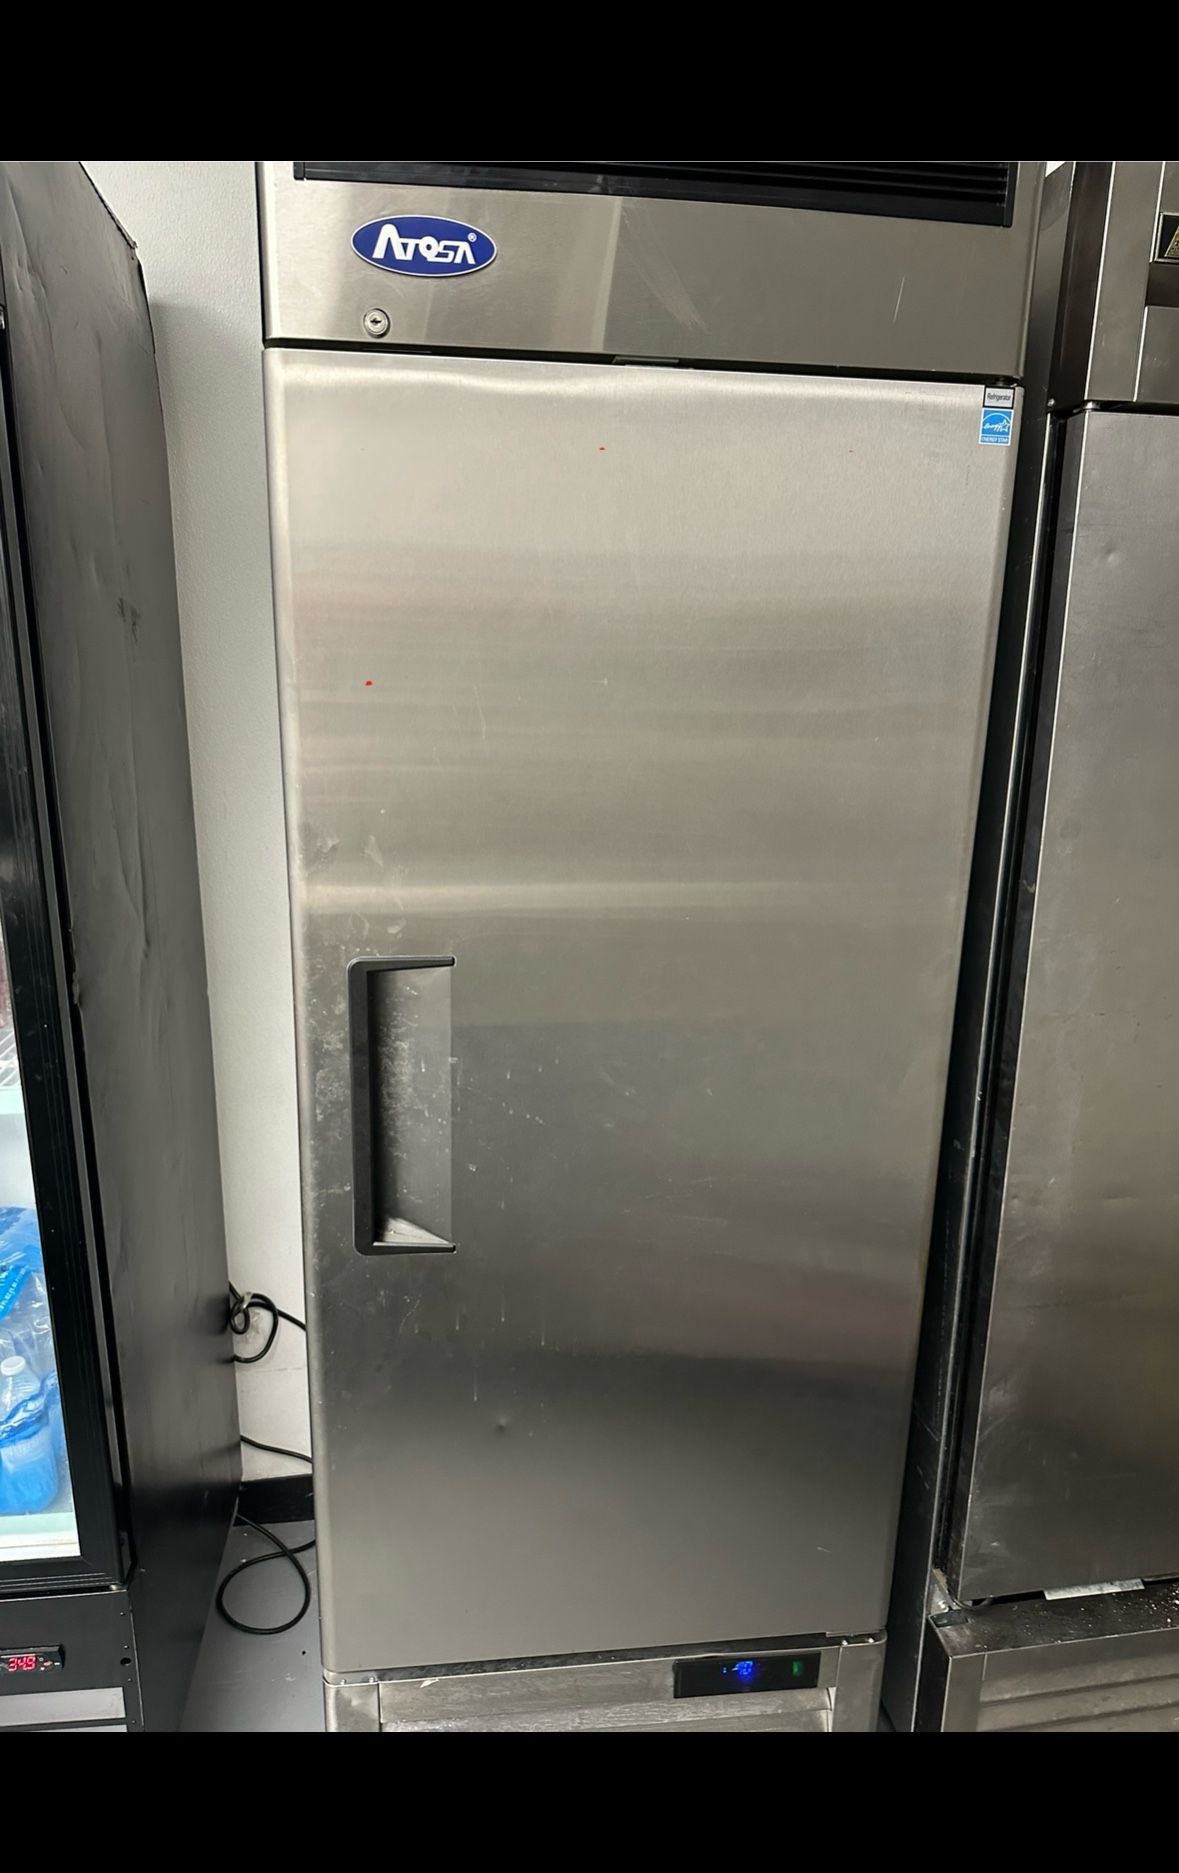 Stainless Steel Commercial Refrigerator 